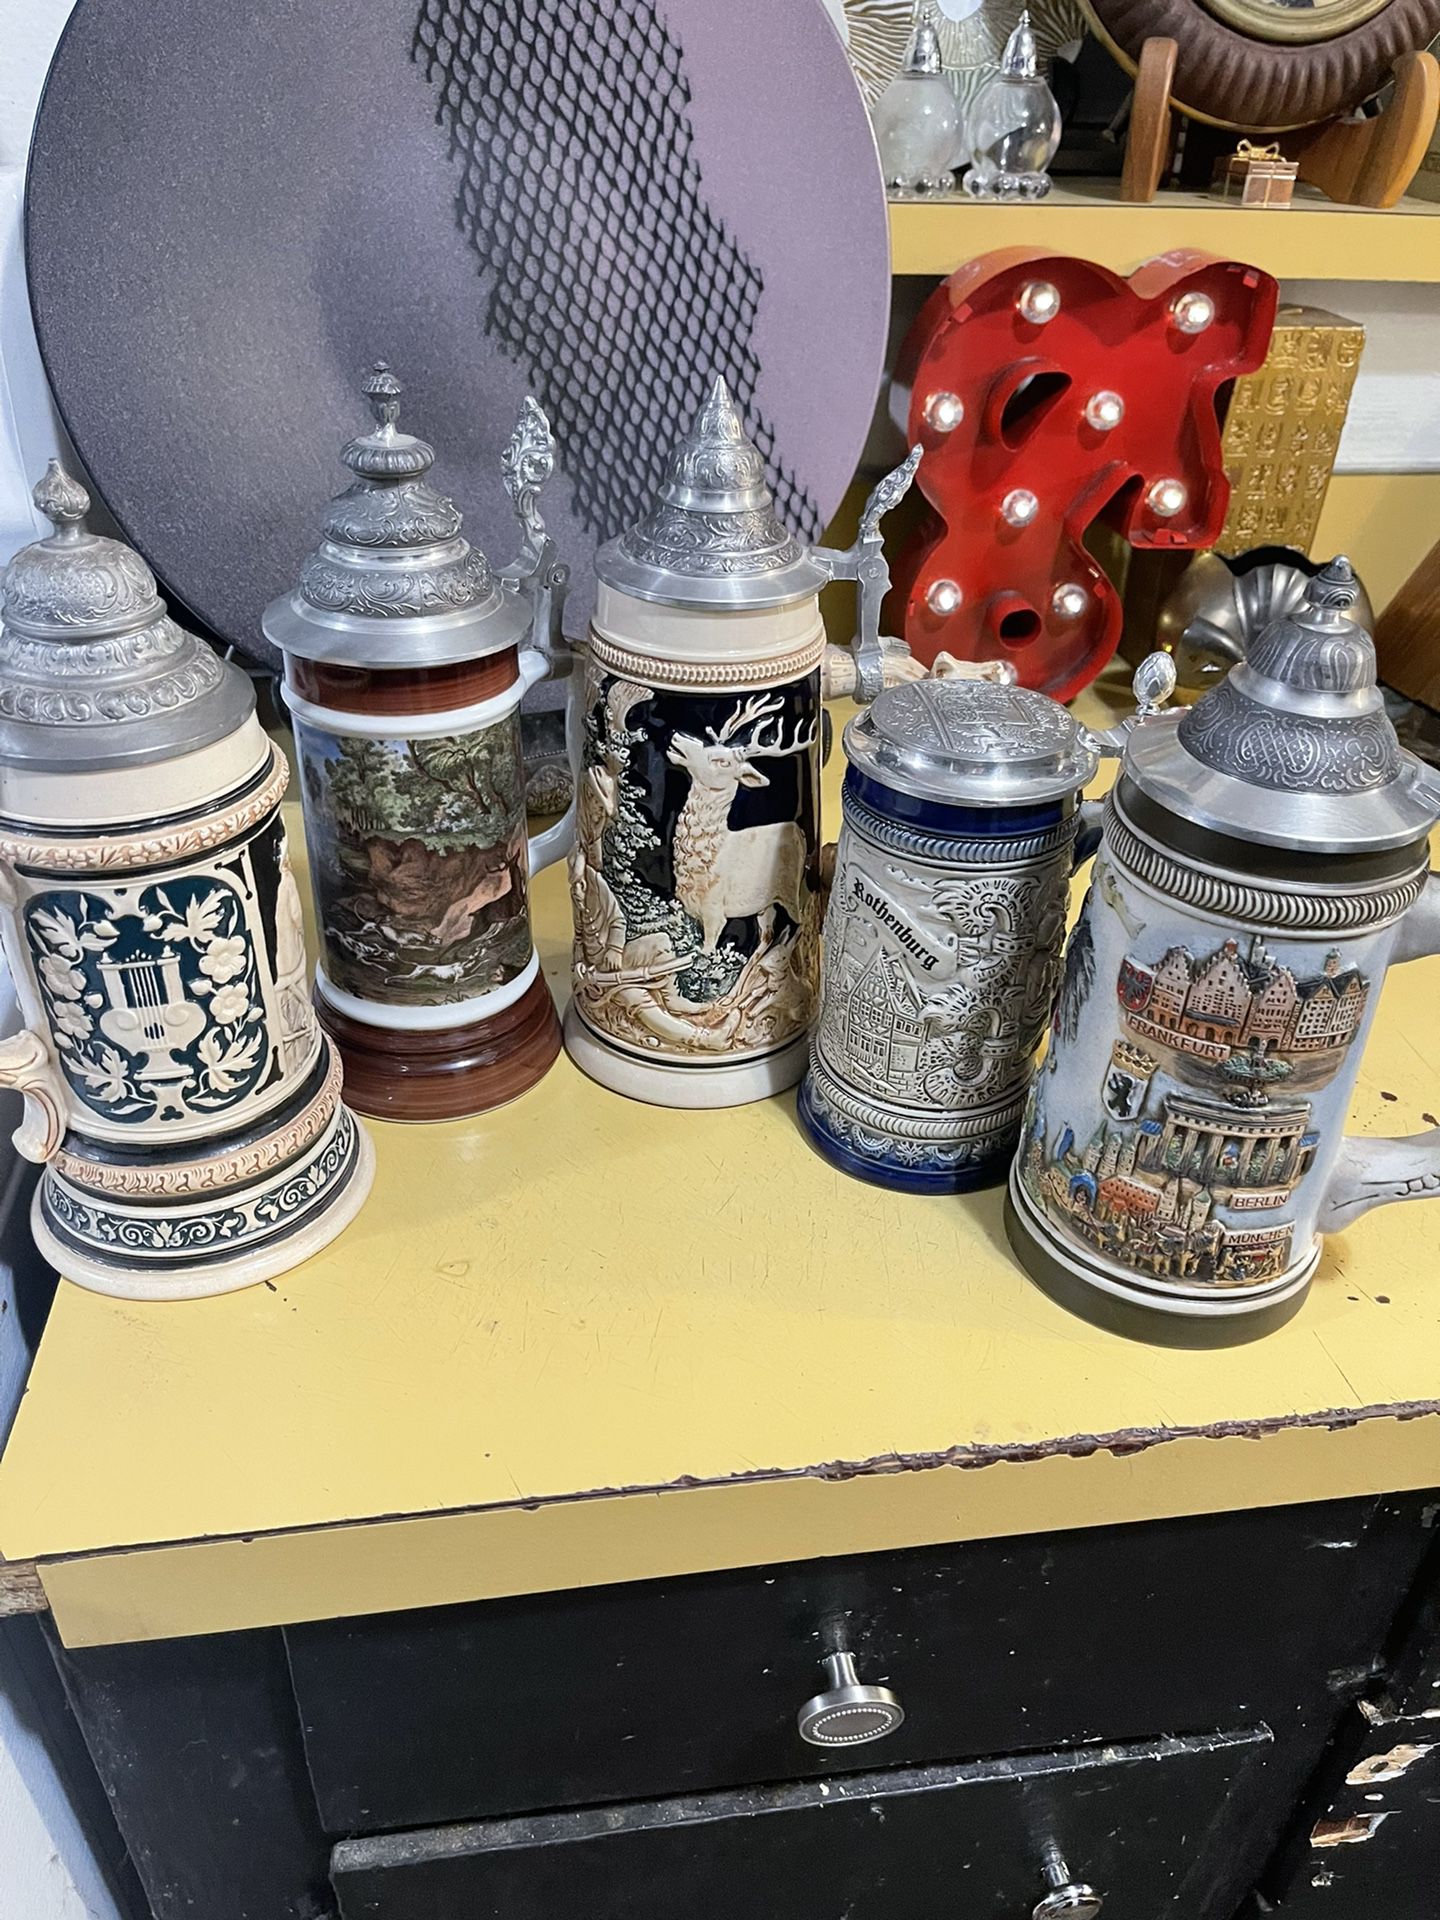 5 Rare Antique German Beer Steins, The Price Of A Lifetime!  300$ OBO Takes Then All!